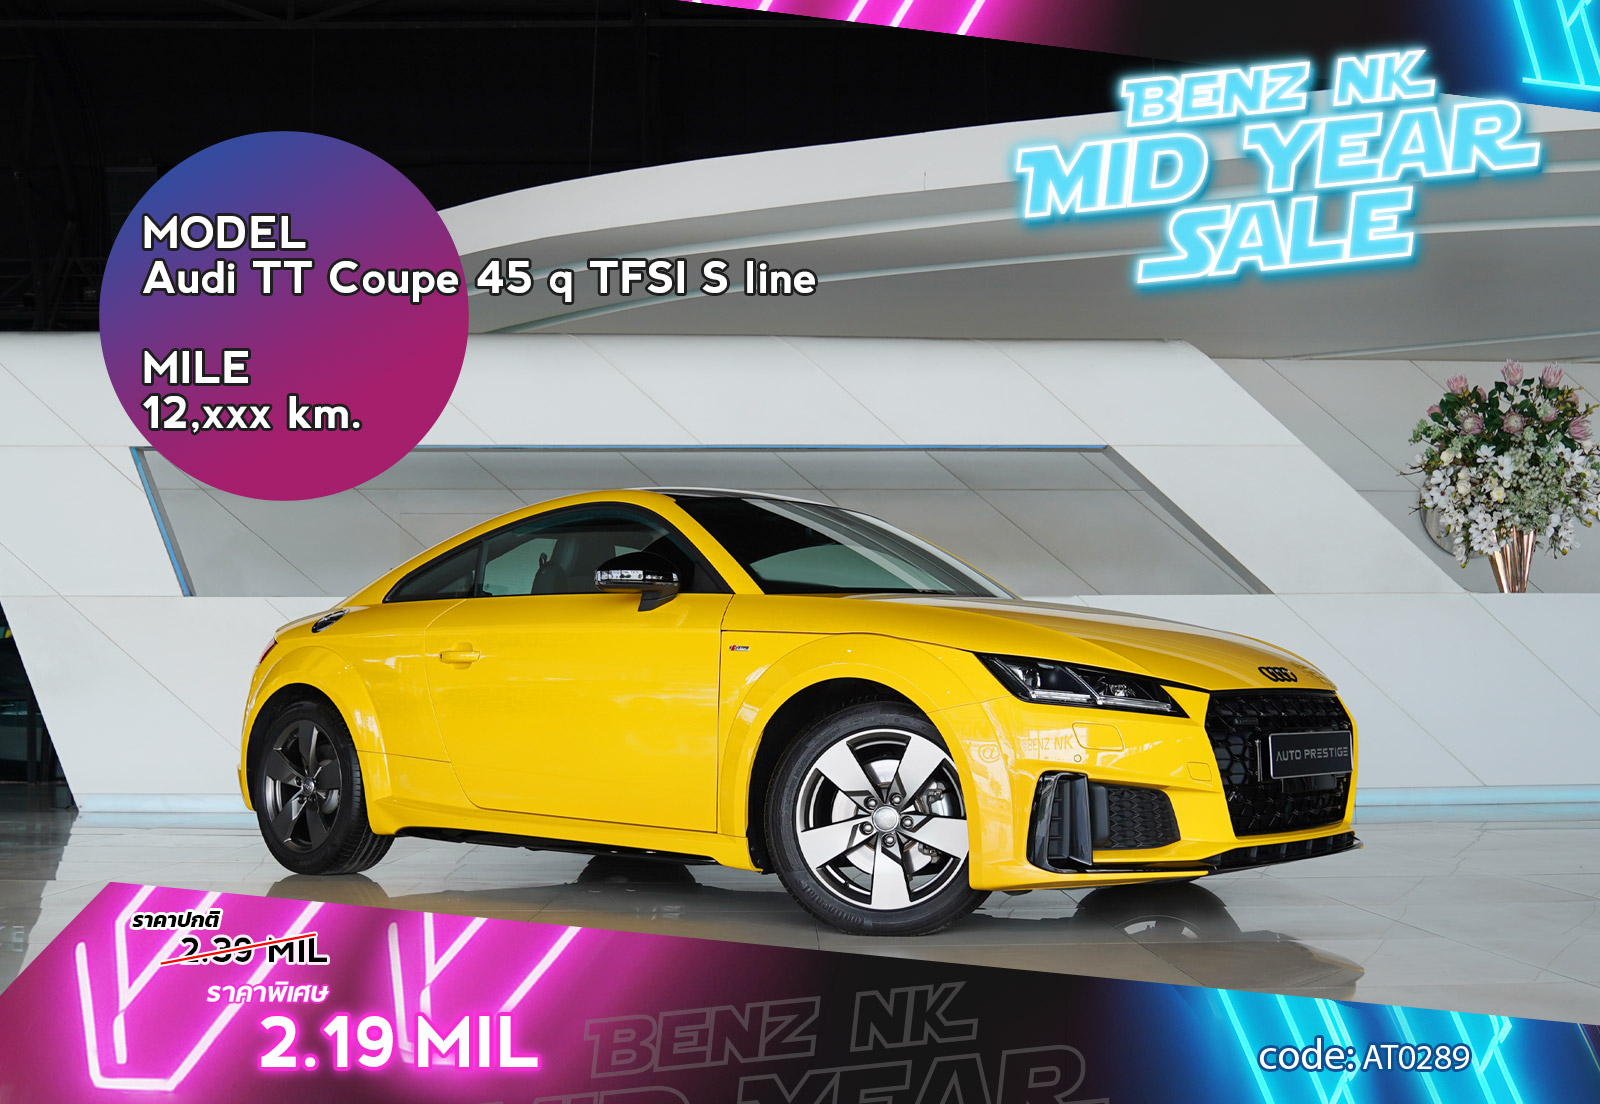 Audi TT Coupe 45 q TFSI S line Other Brand